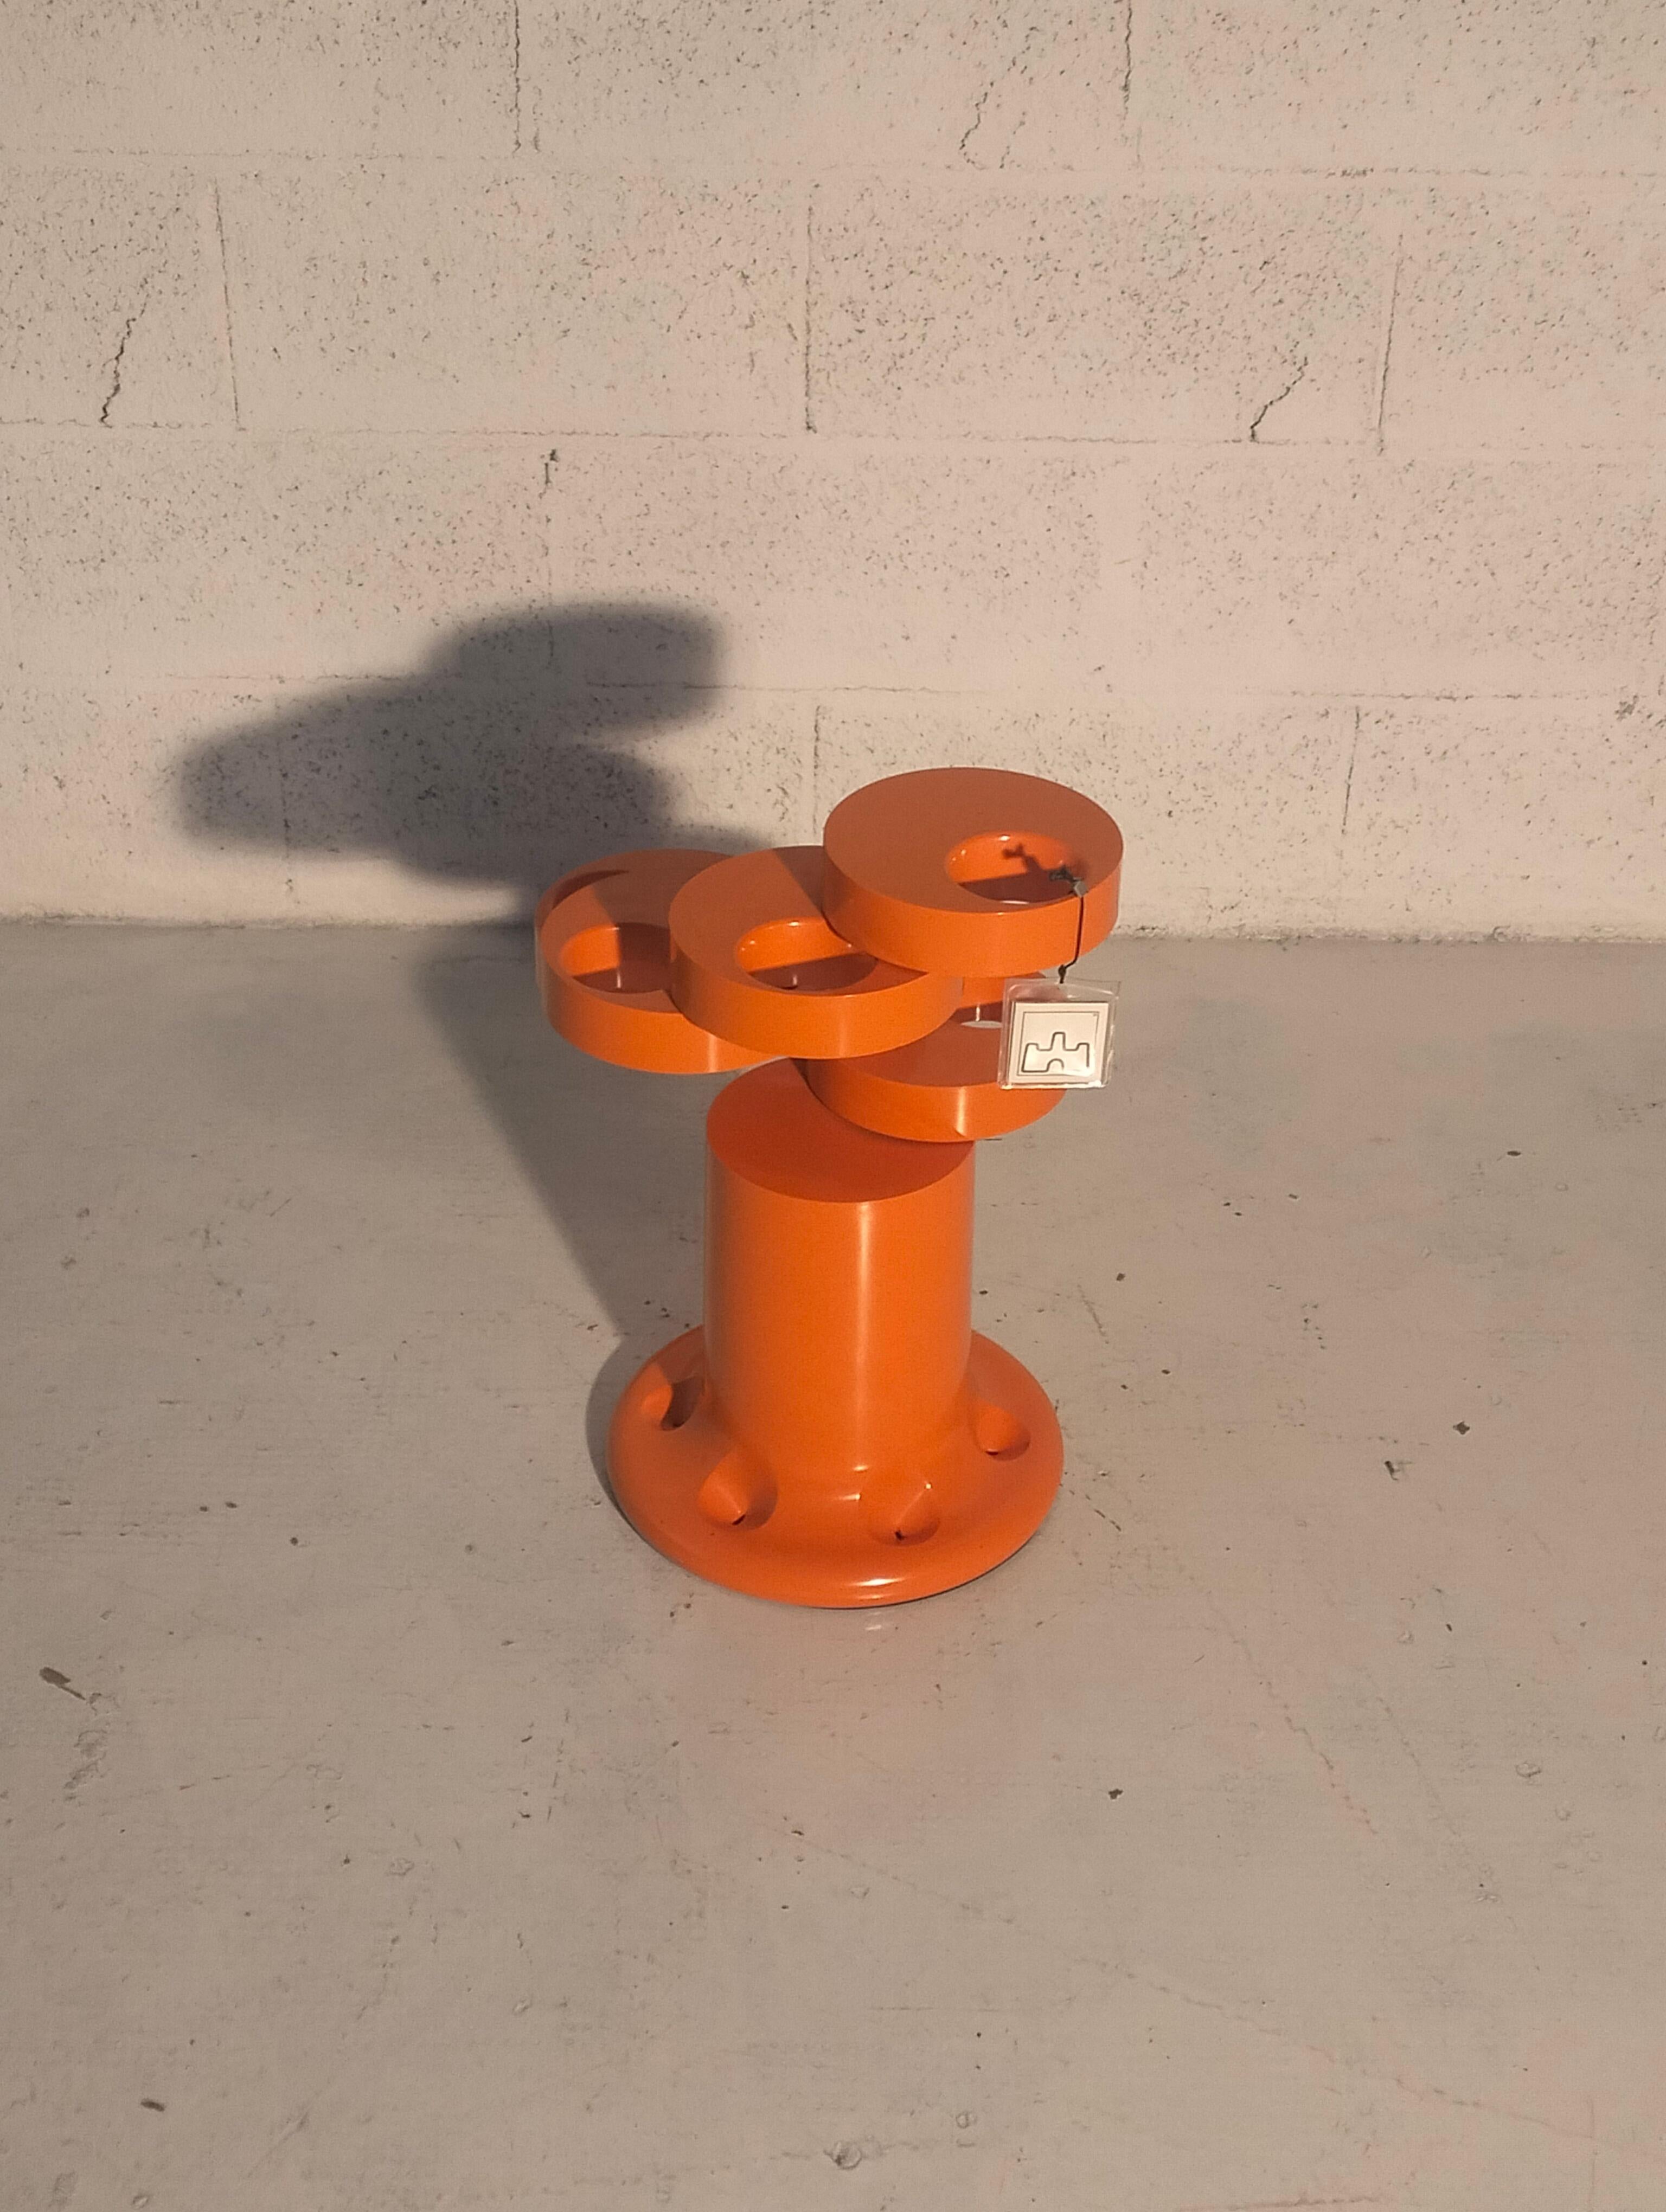 The Pluvium umbrella stand was designed by Giancarlo Piretti for Anonima Castelli in 1972.
It features a rotating stack of six discs on a weighted base.

Excellent condition used only for display

Giancarlo Piretti was born in Bologna in 1940.
He